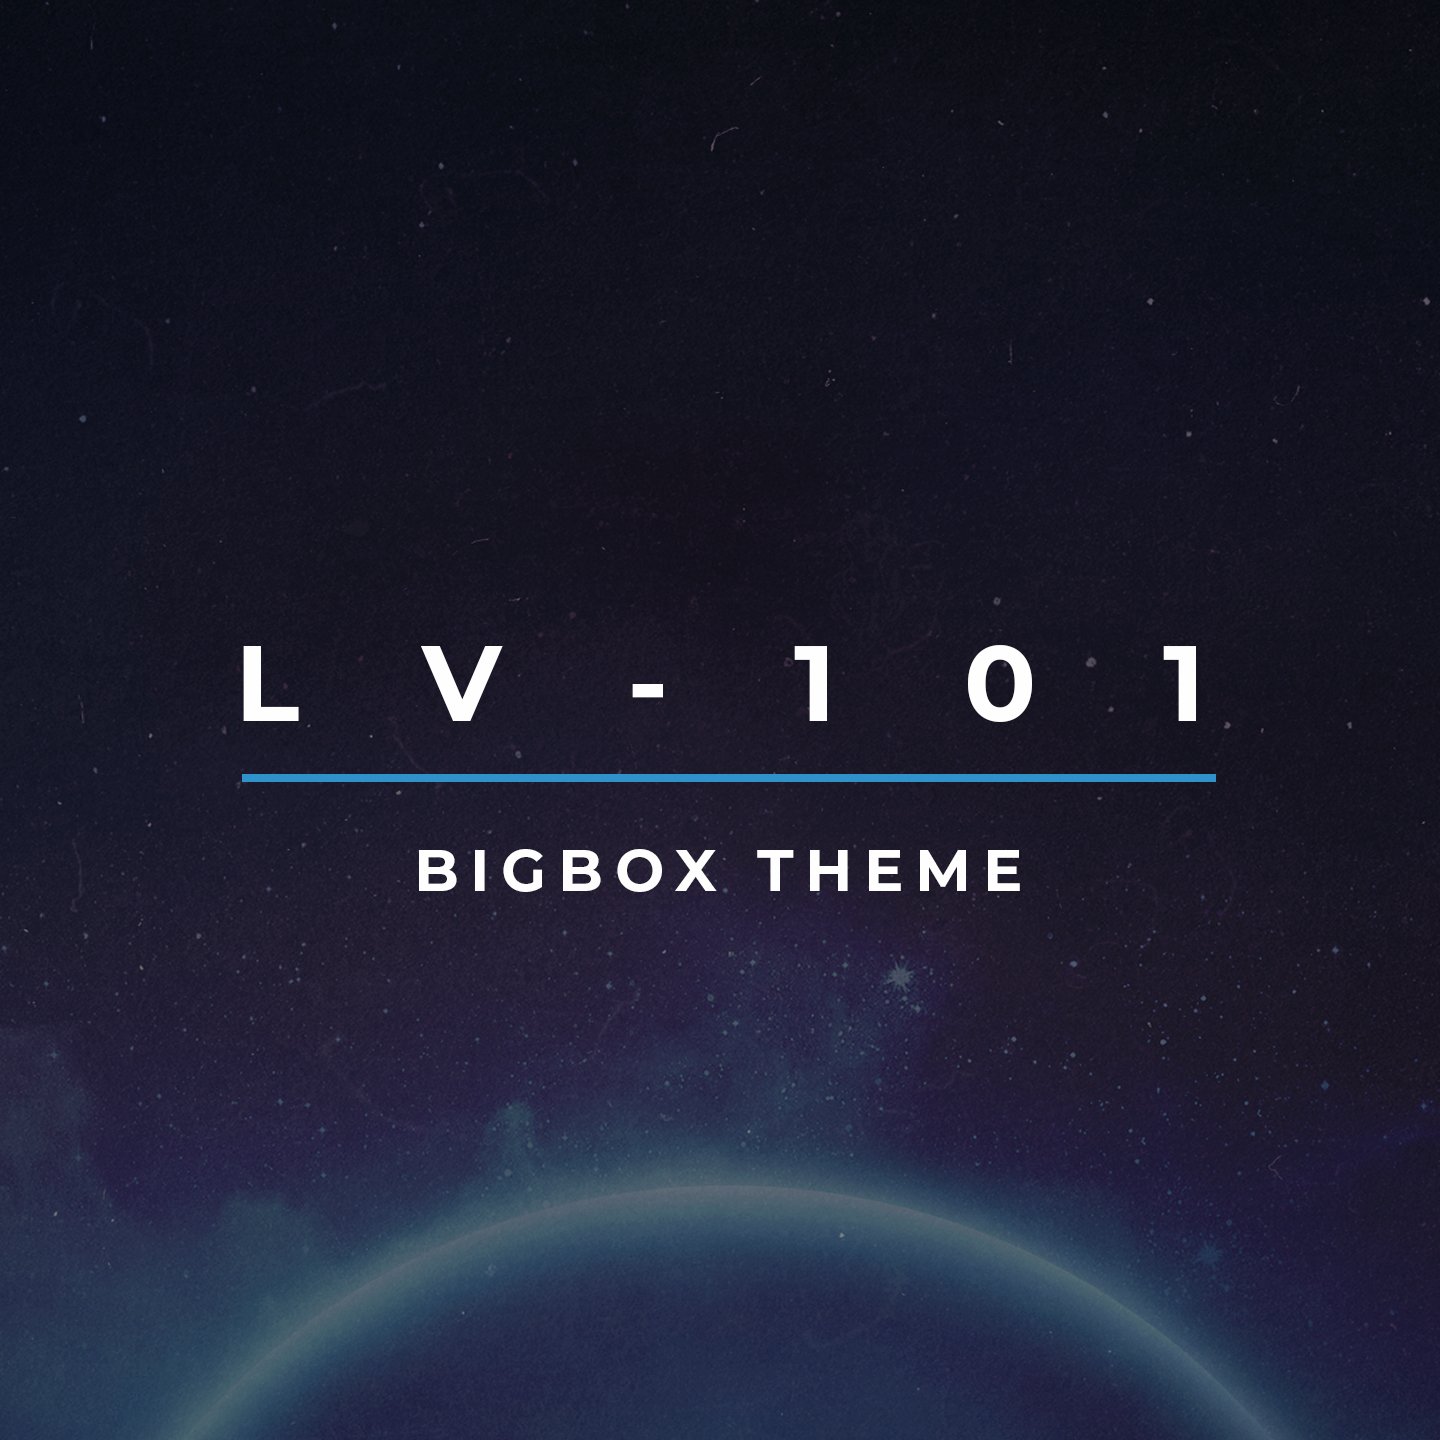 More information about "LV-101"